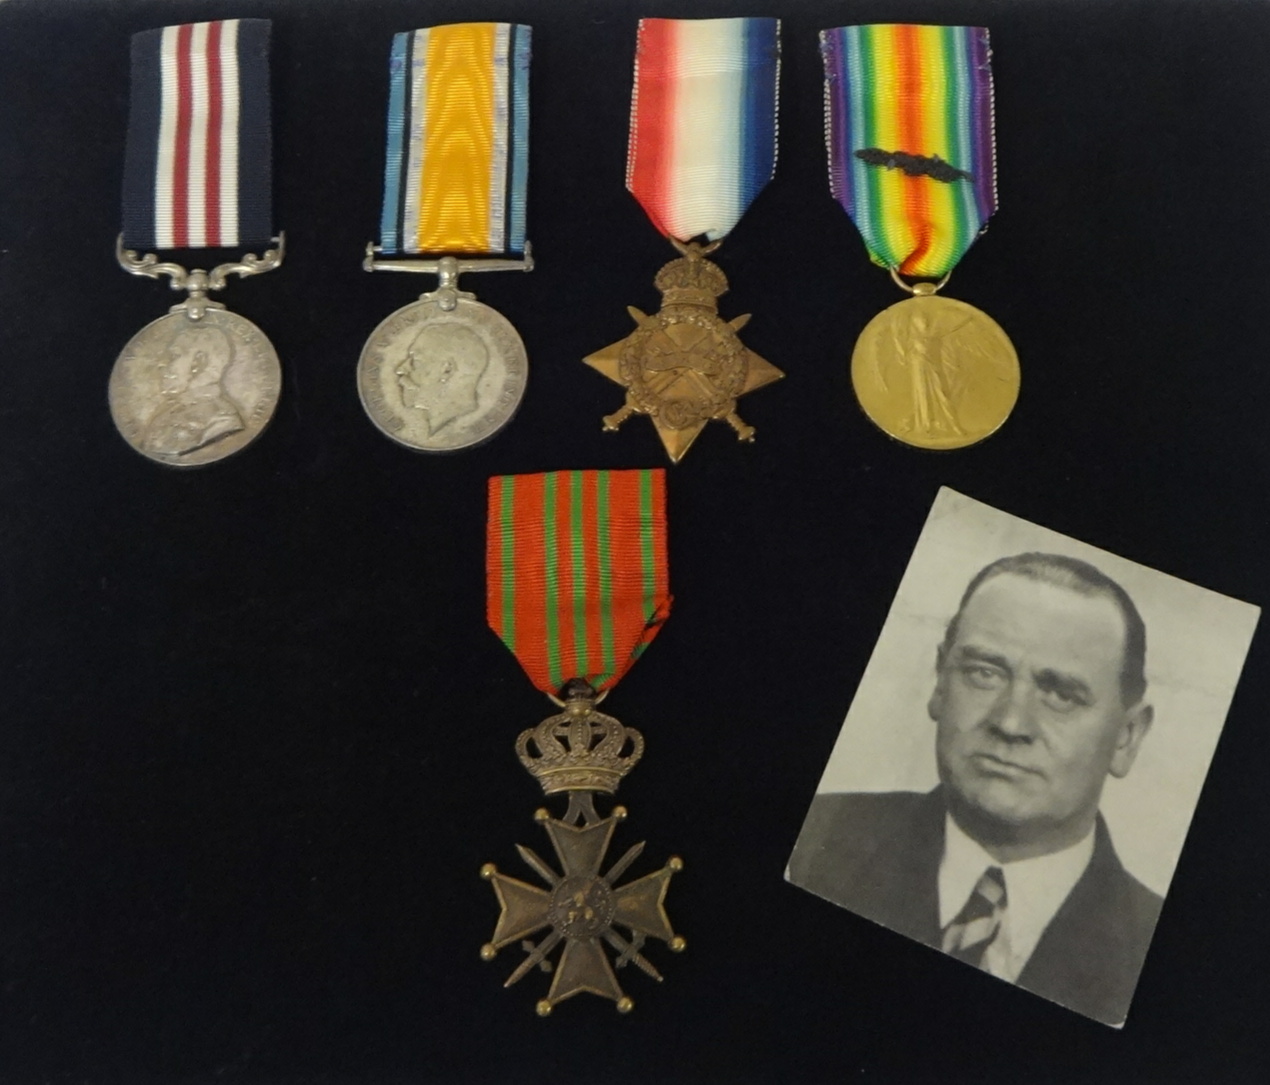 Five Great War Medals including the Military Medal (MM) awarded to SGT. A. (Arthur) BOUGHTON 1/ - Image 4 of 6